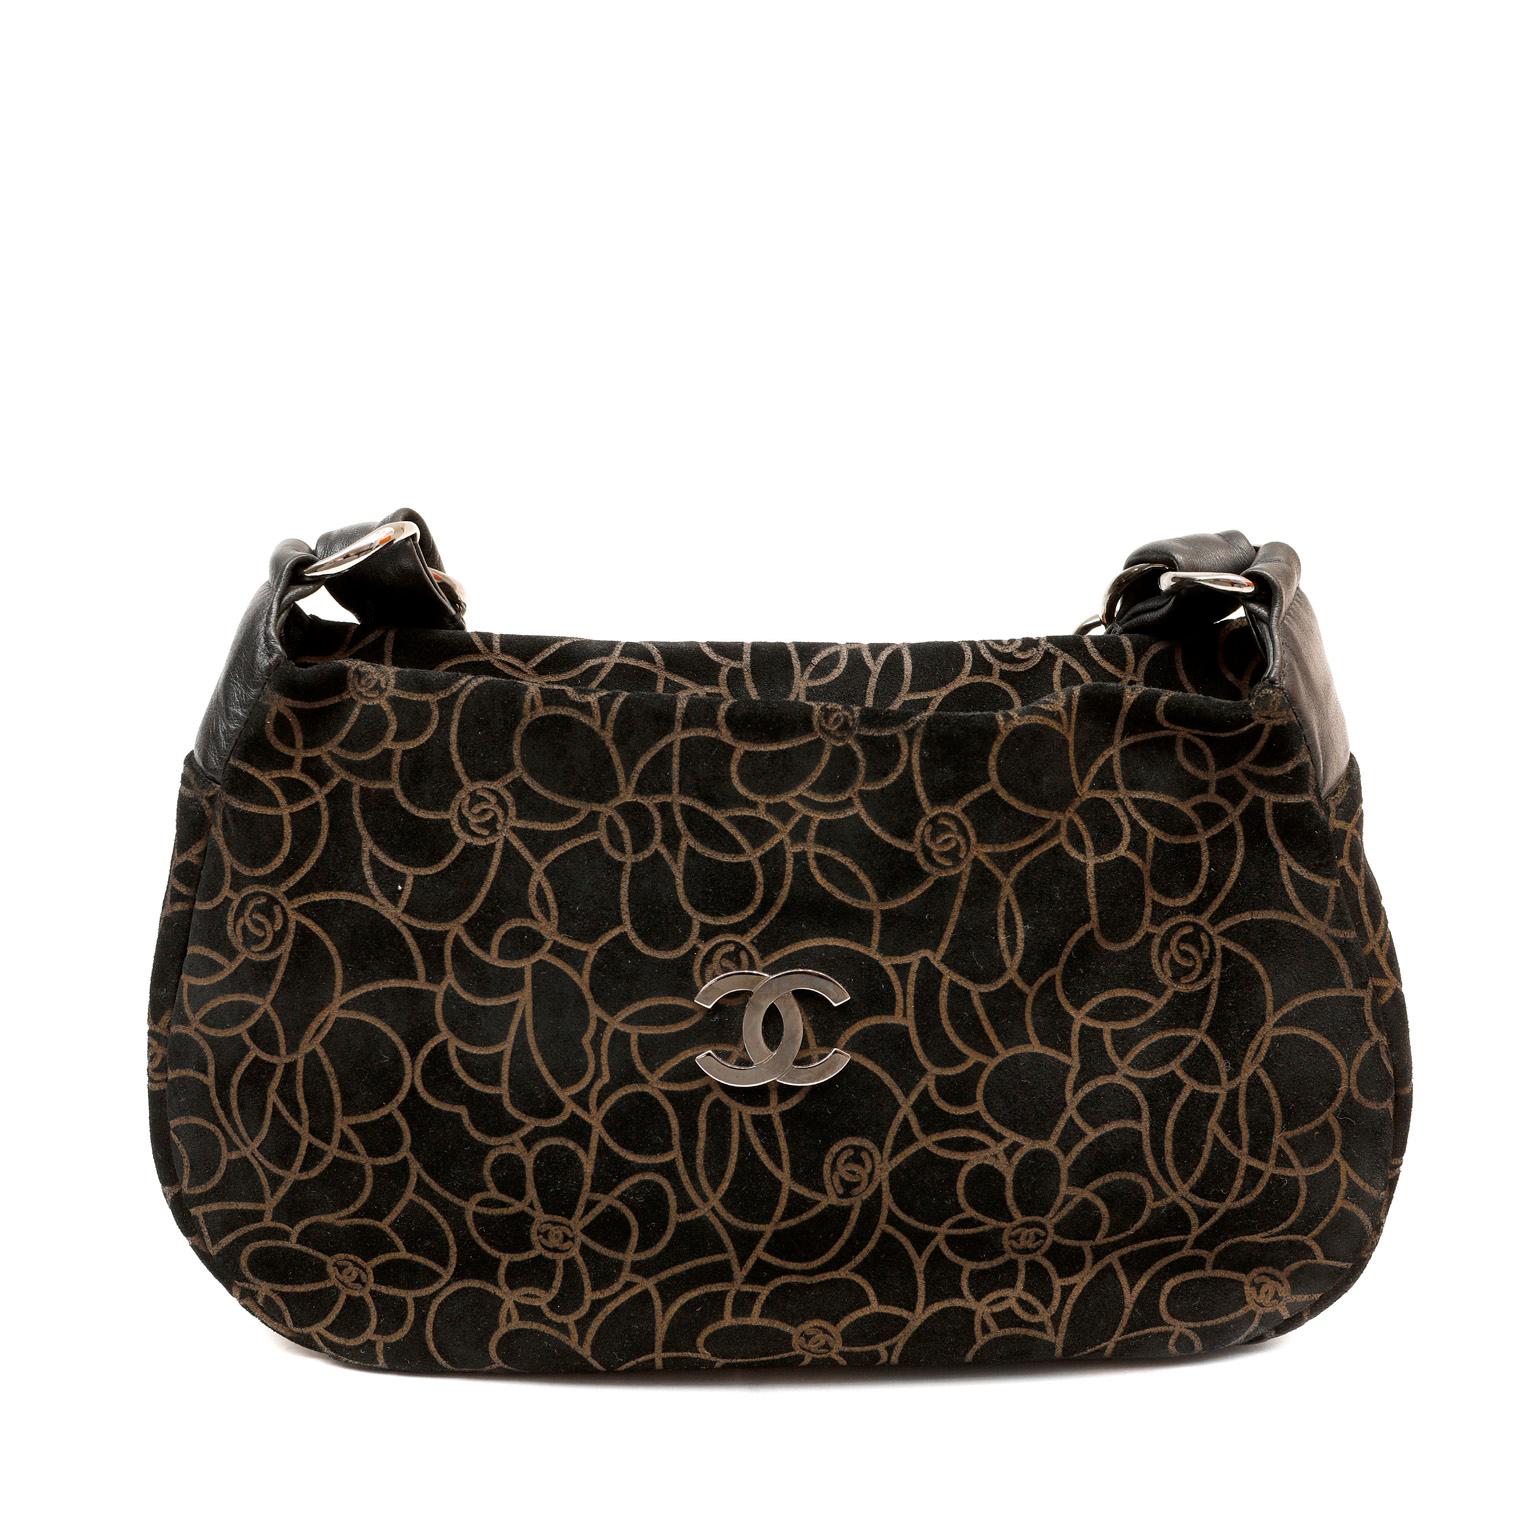 This authentic Chanel Brown and Black Embossed Camellia Bag is in excellent plus condition.  Suede zipper top shoulder bag is embossed with swirling camellia flower pattern and cc logos.   Top zipper closure with clean monogram fabric interior.